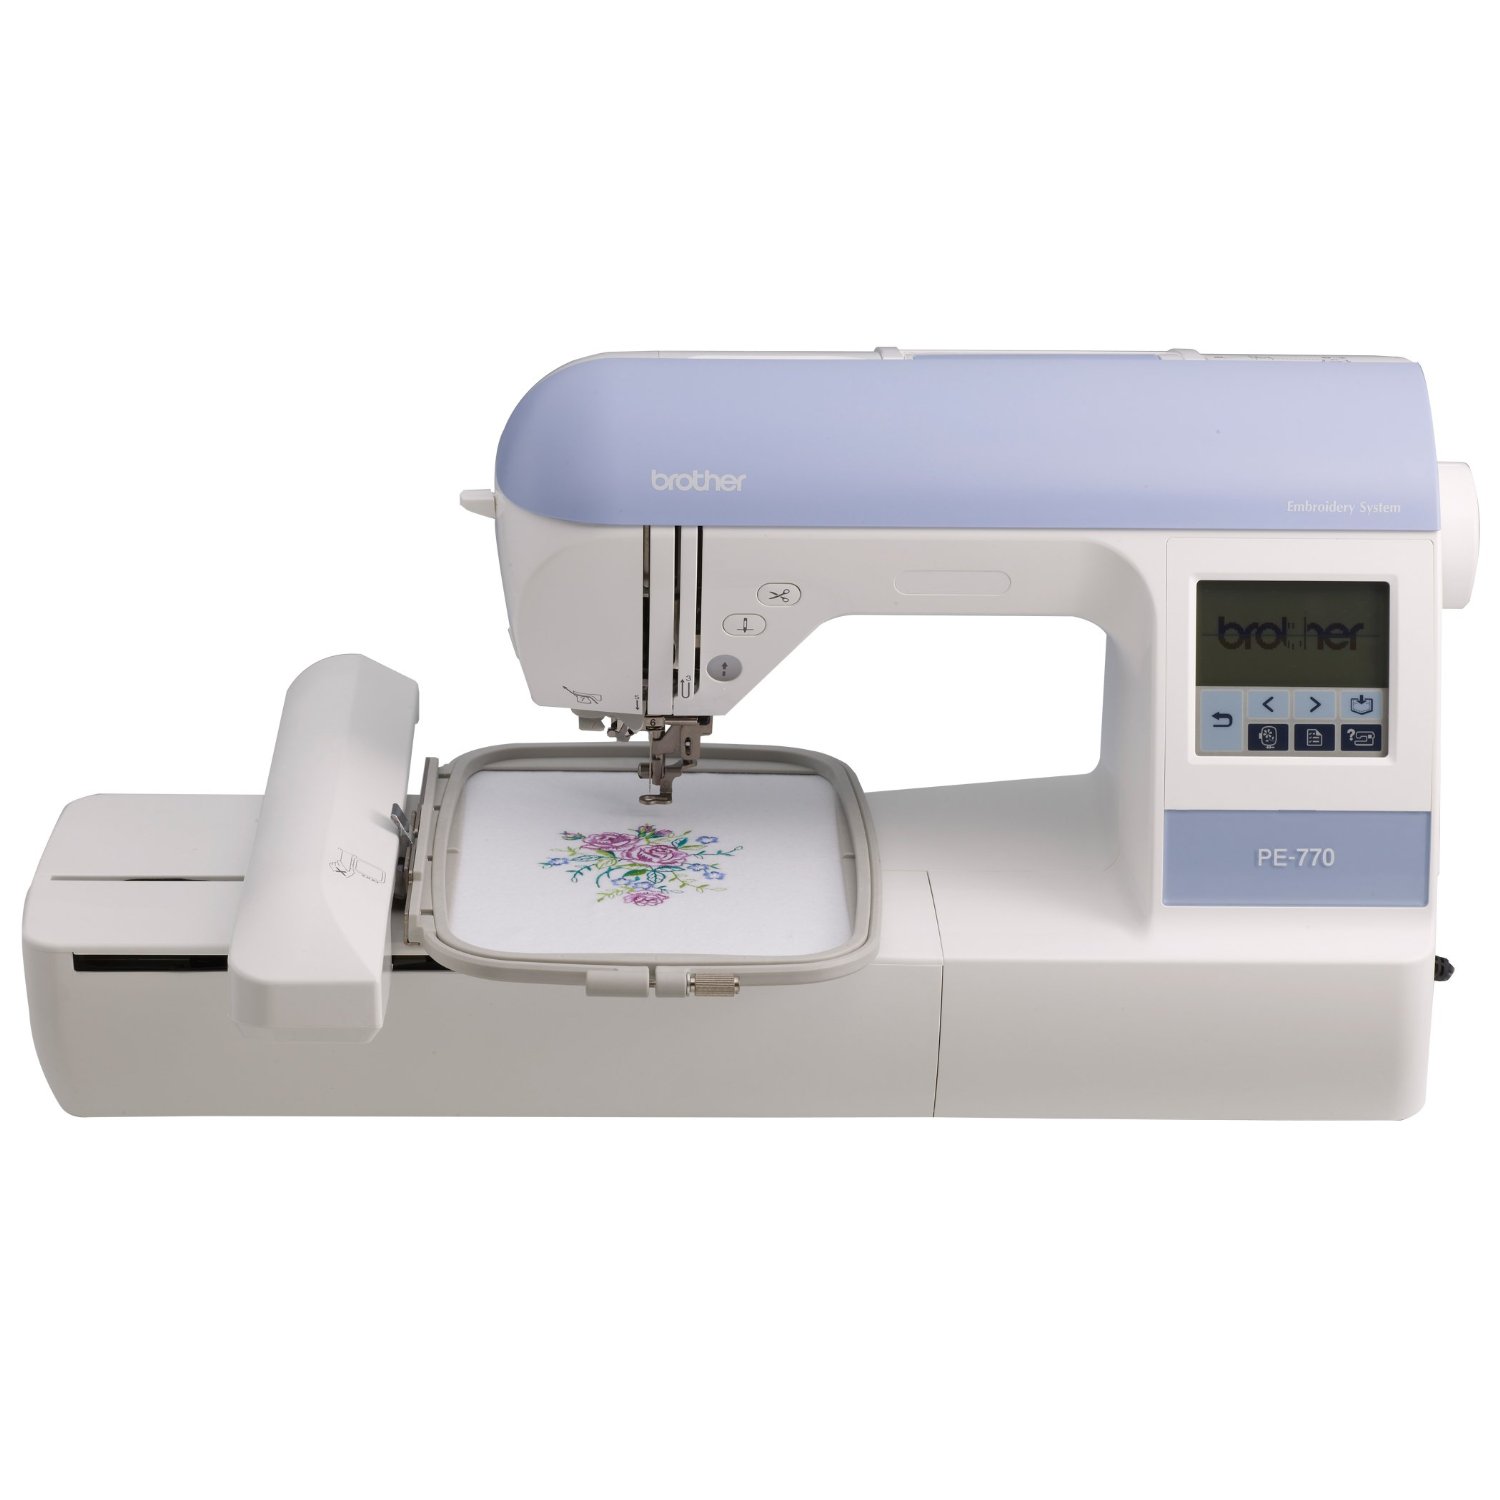 Save on the Brother PE770 5×7 Inch Embroidery Machine w/ Built In Designs – Just $471.99!